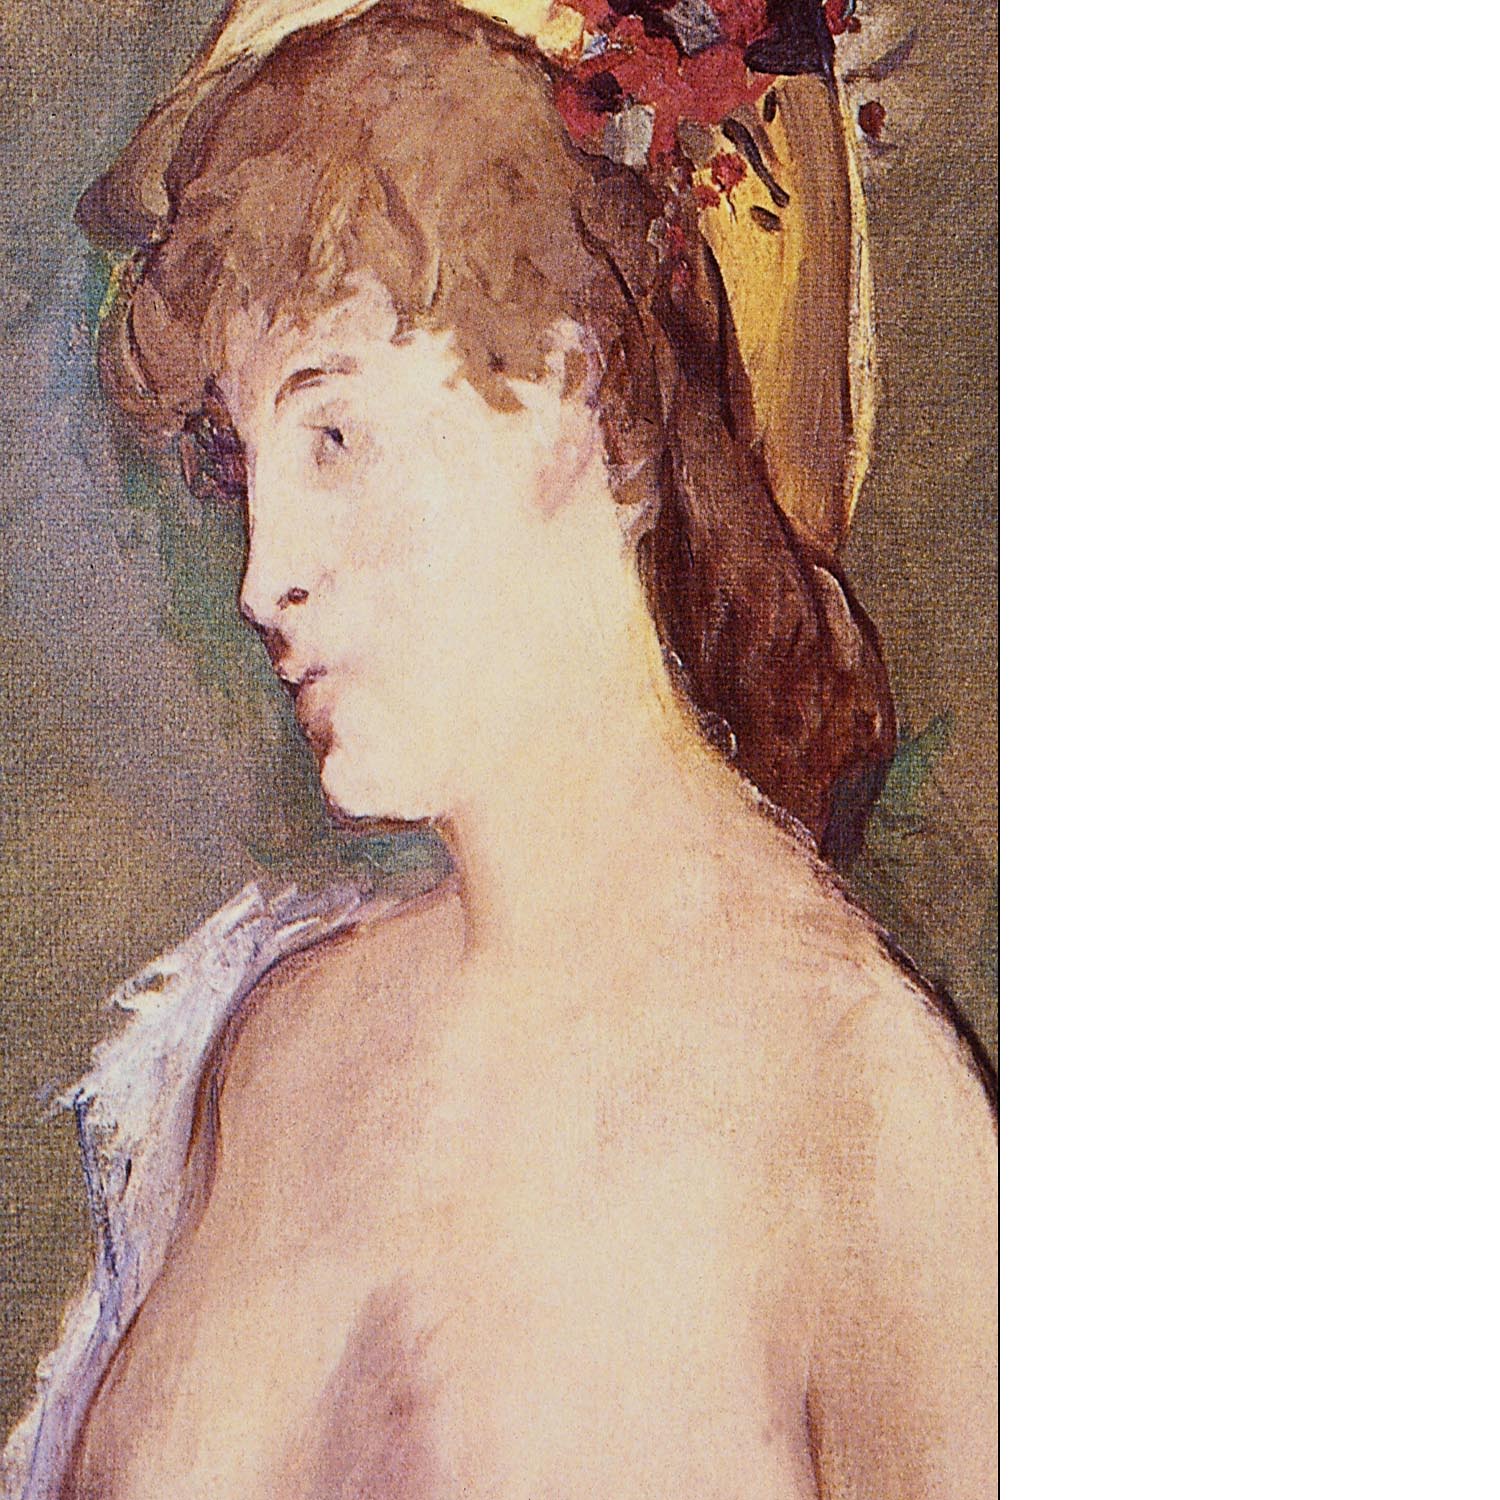 The Blond Nude by Manet Floating Framed Canvas